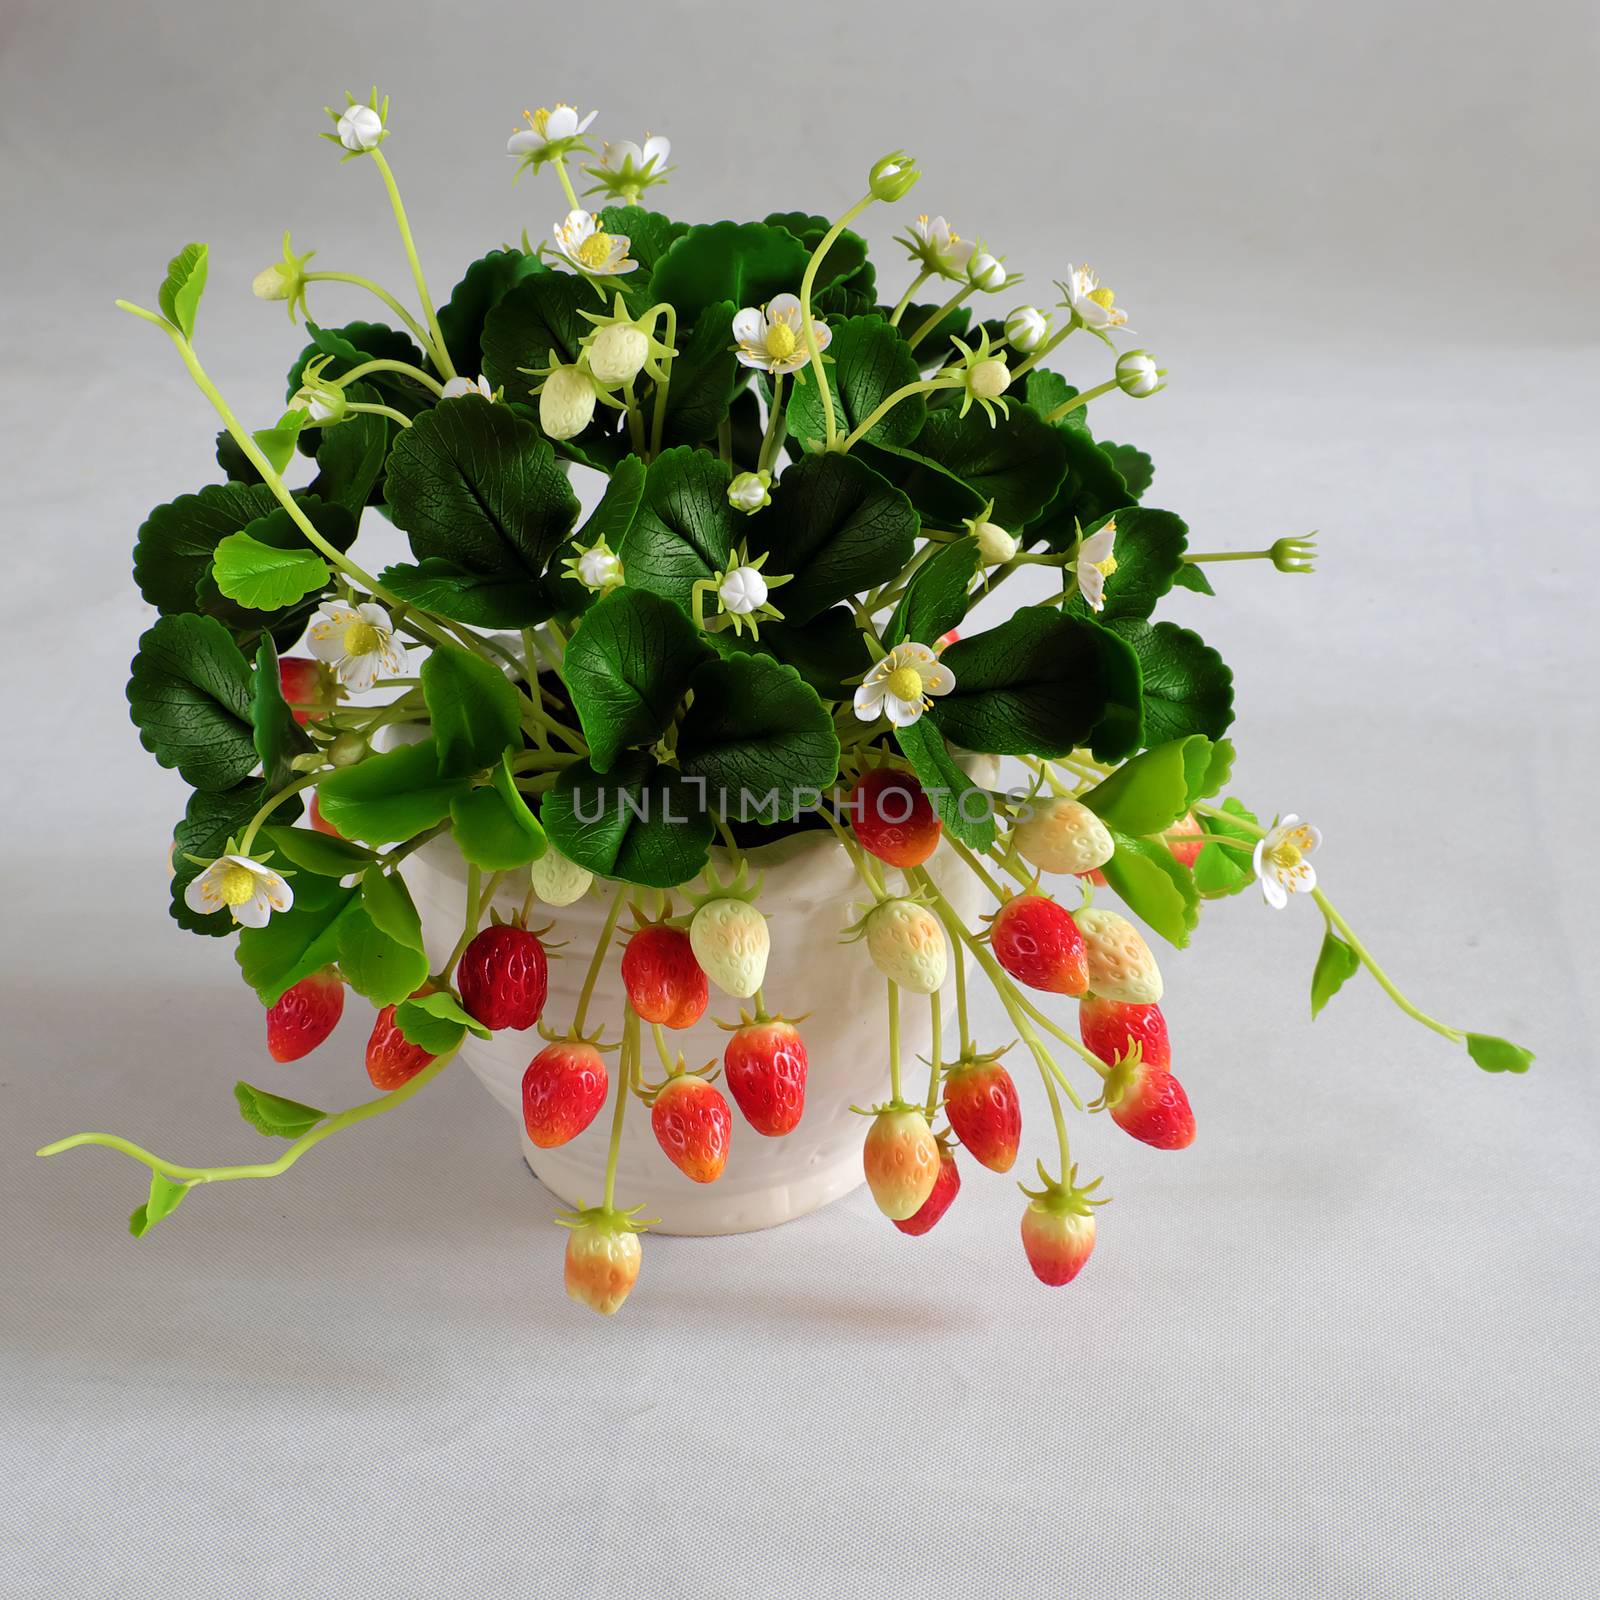 clay flower art, strawberry pot for home decor by xuanhuongho